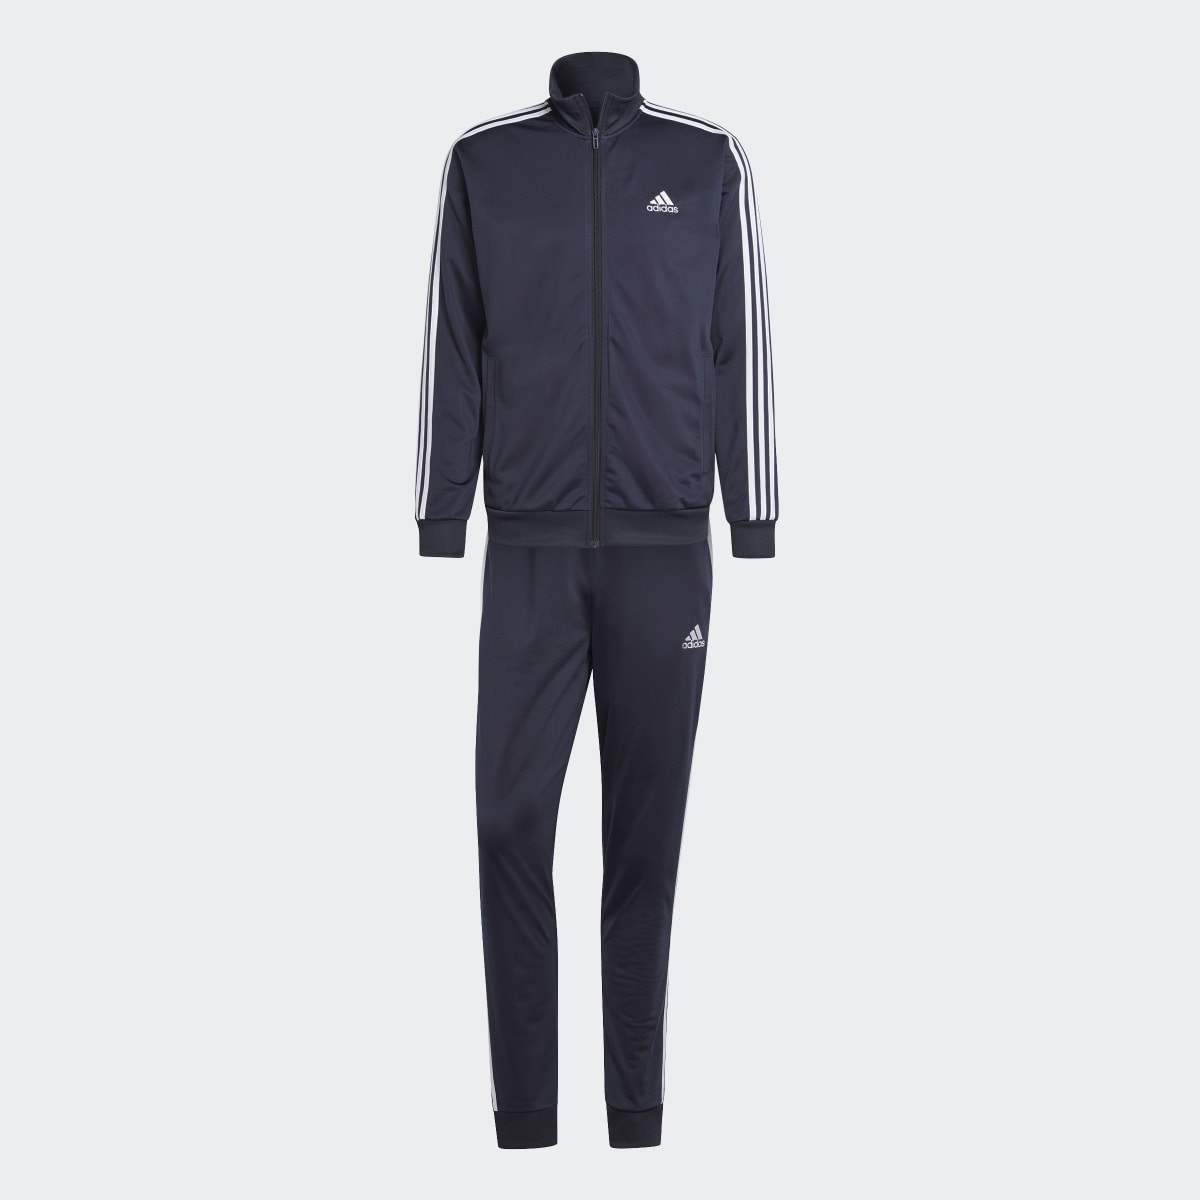 Adidas Basic 3-Stripes Tricot Track Suit. 5